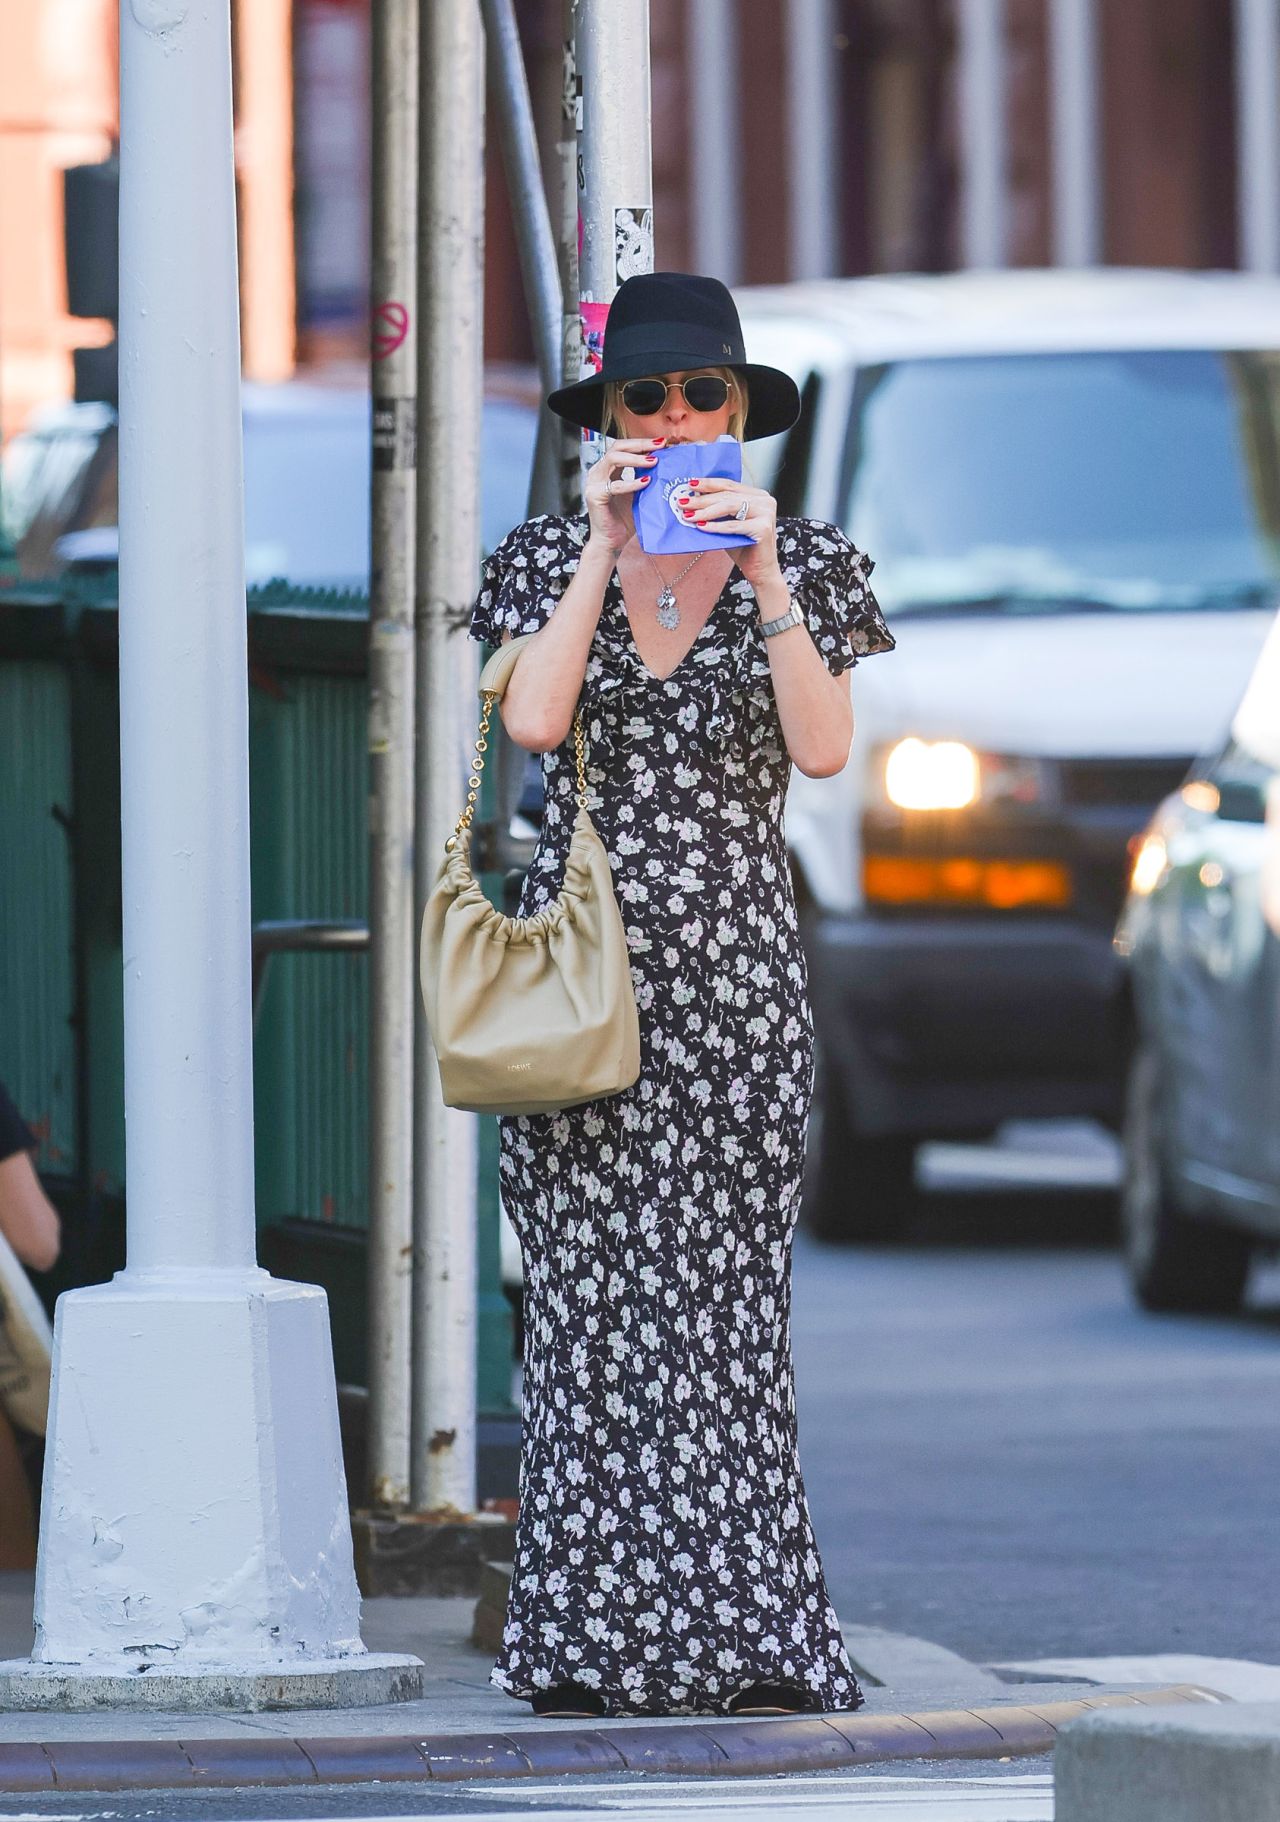 NICKY HILTON WAS SPOTTED OUT ENJOYING A WALK IN THE BIG APPLE4